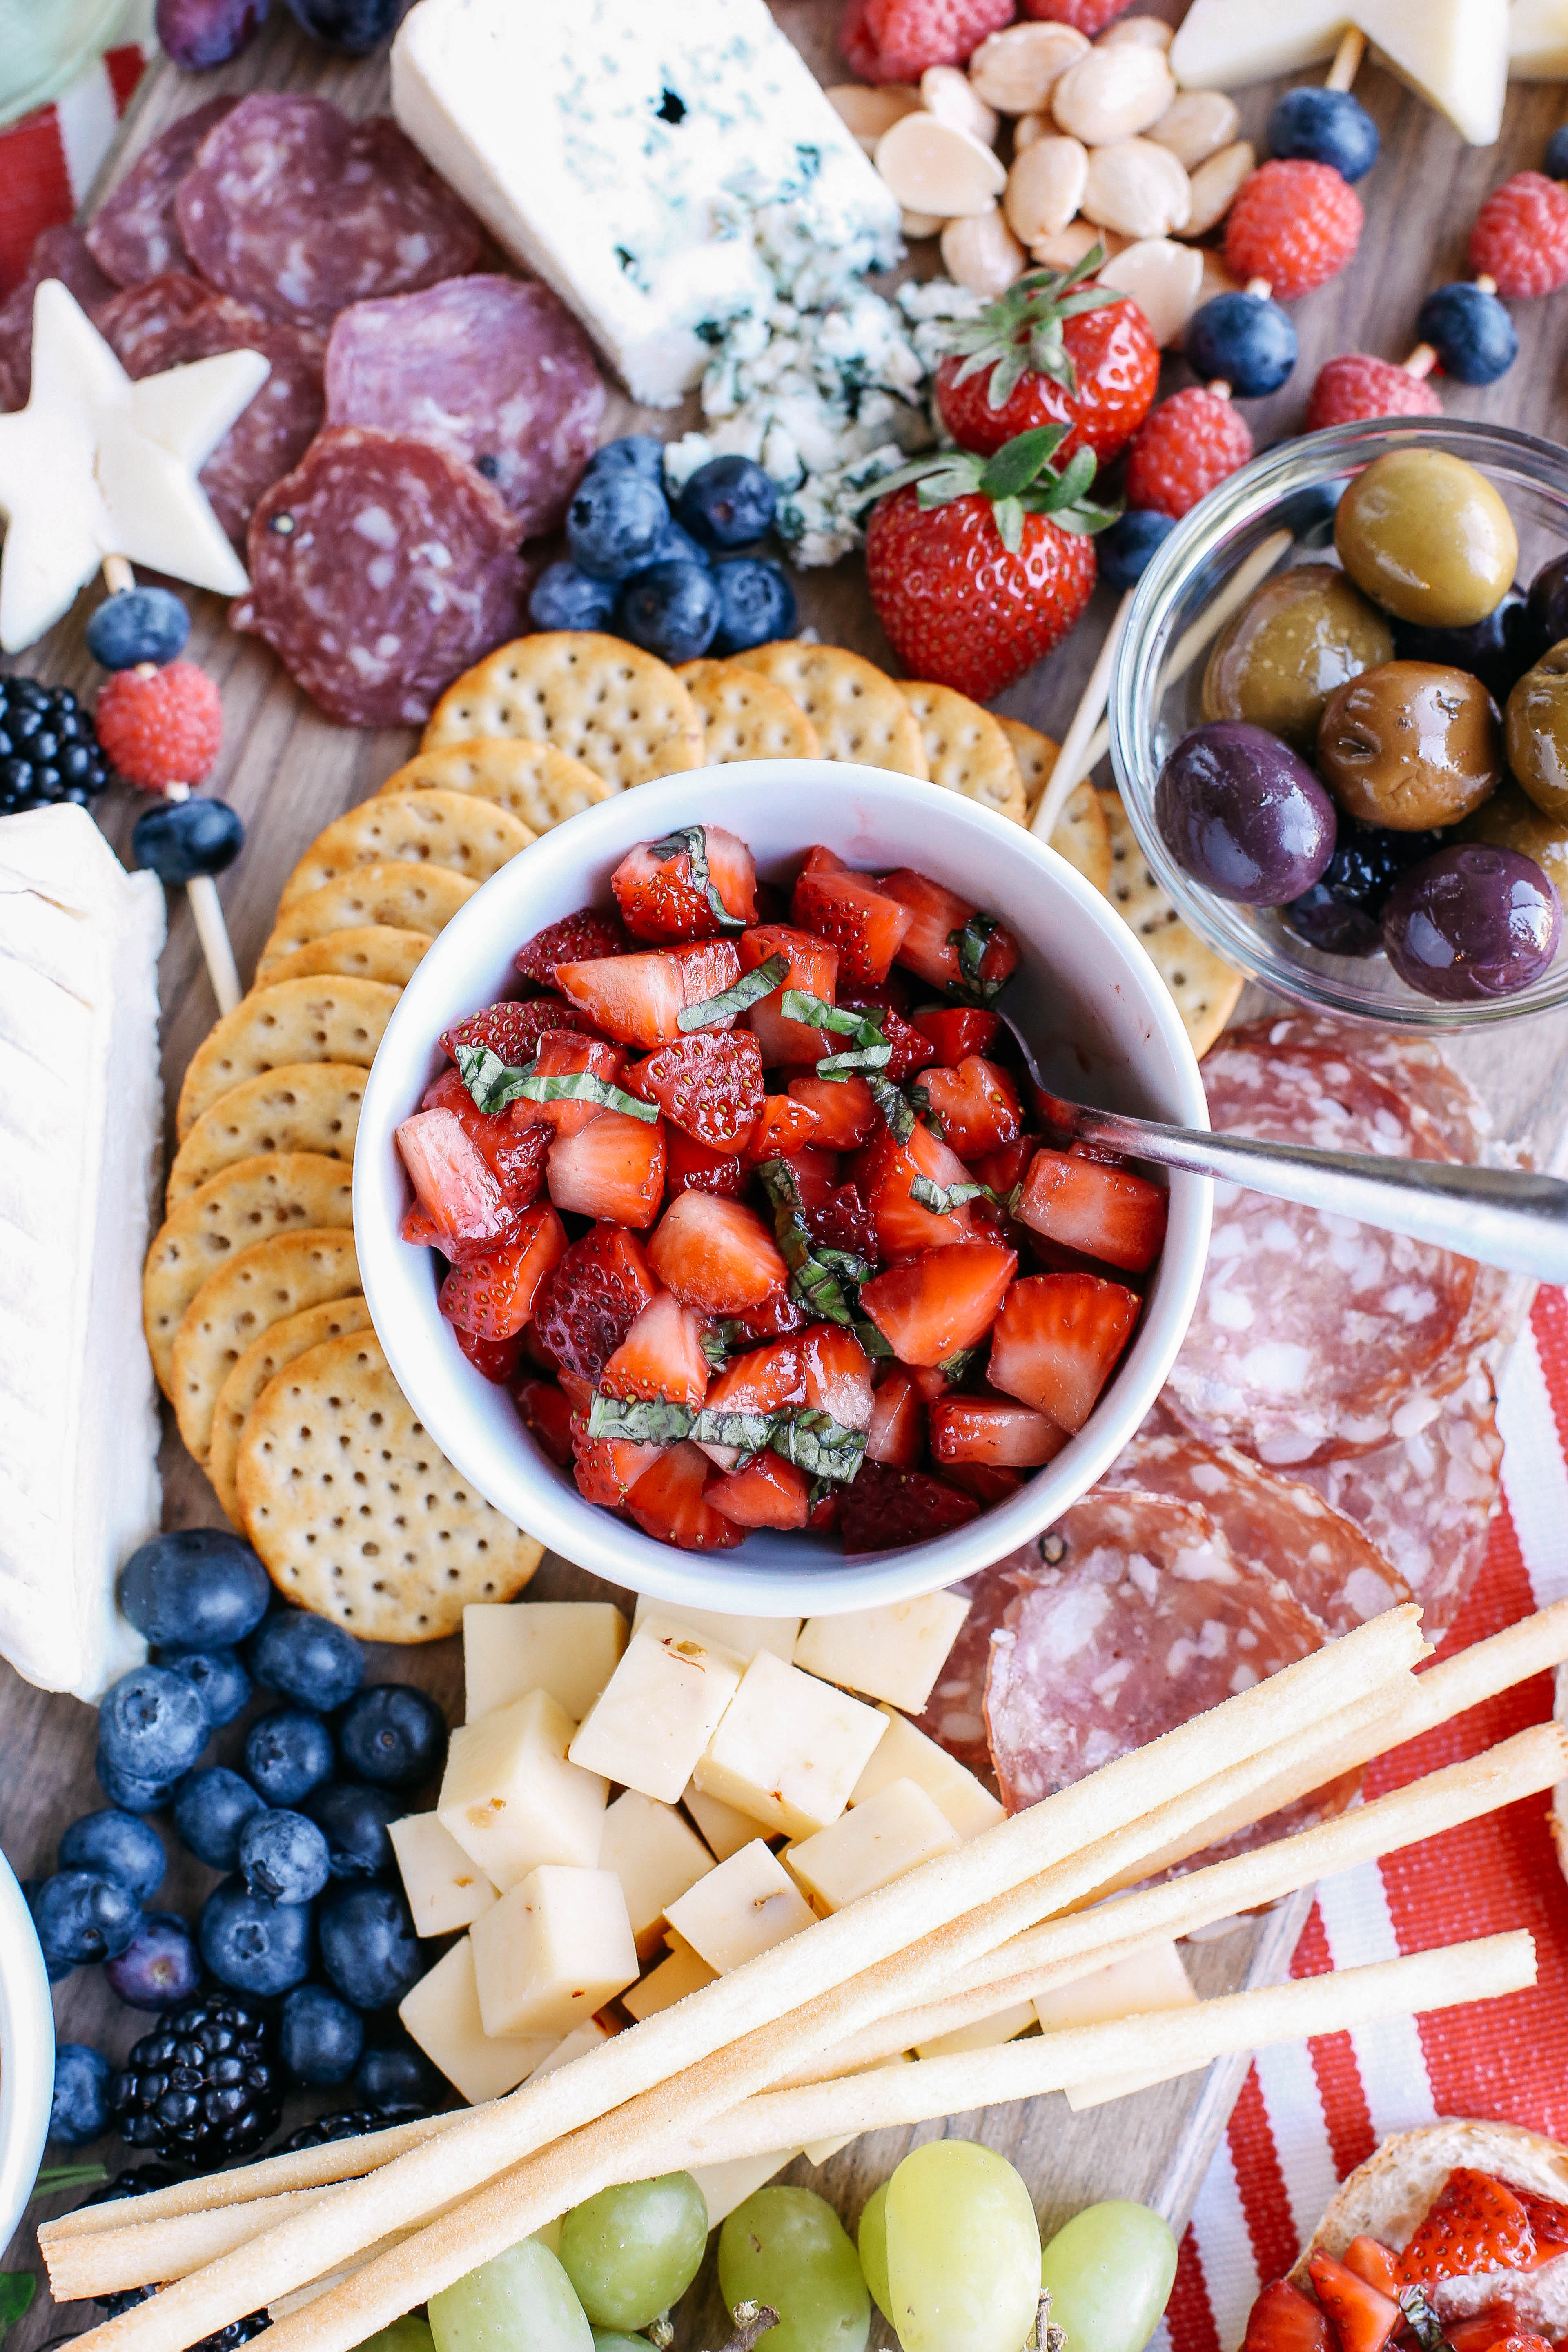 The 4th of July is right around the corner so kick off the summer with the Ultimate Patriotic Cheeseboard! Grab your favorite bottle of wine and share this festive appetizer with your friends and family this holiday!